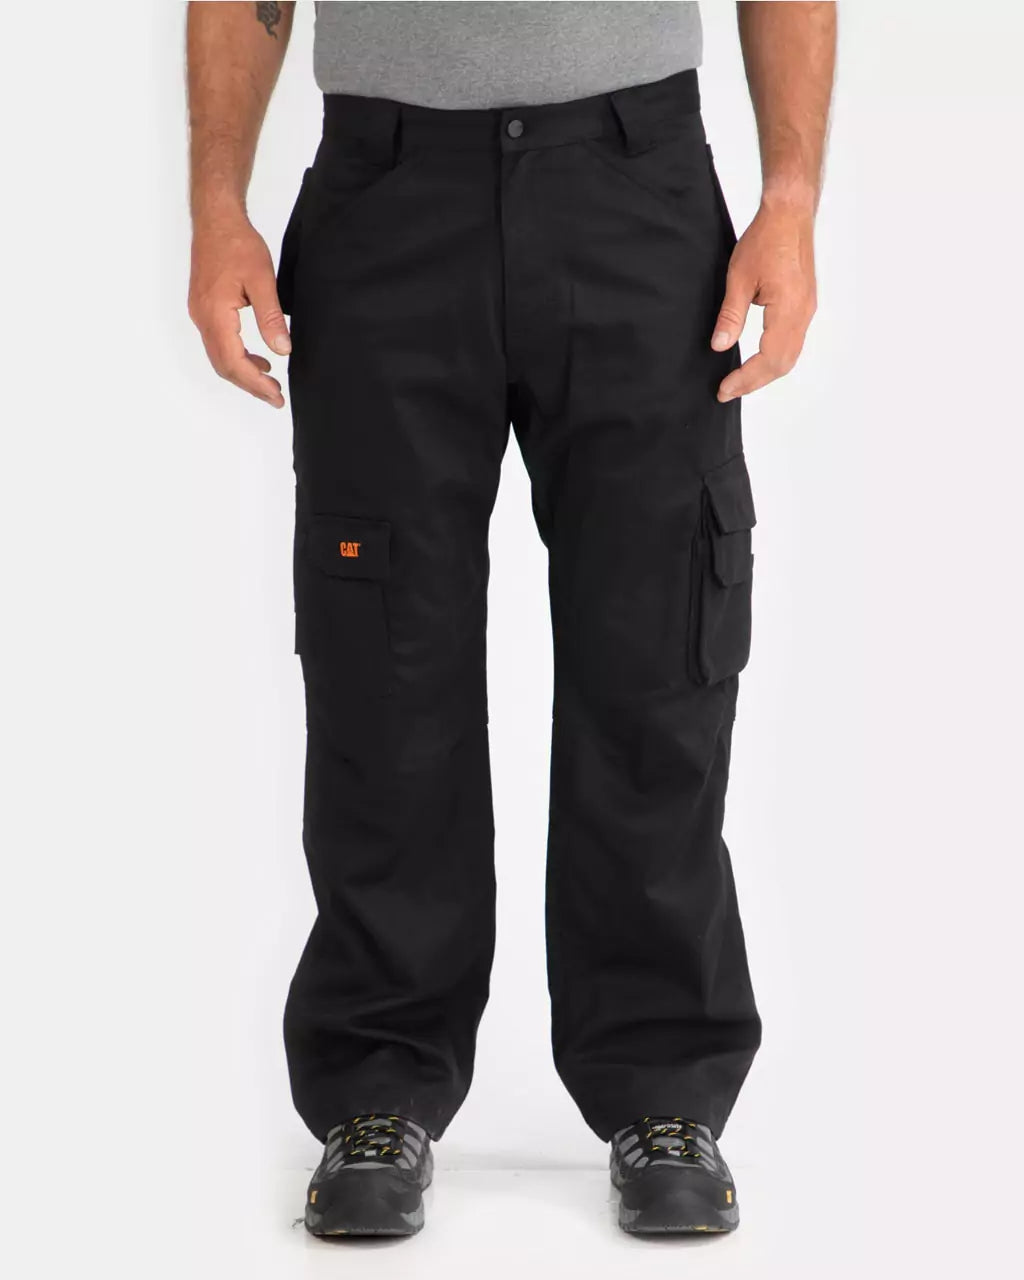 2-in-1 pants?! Add to cart, asap!! 🛒♡ Found these easy cargo pants fr, Cargo  Pants